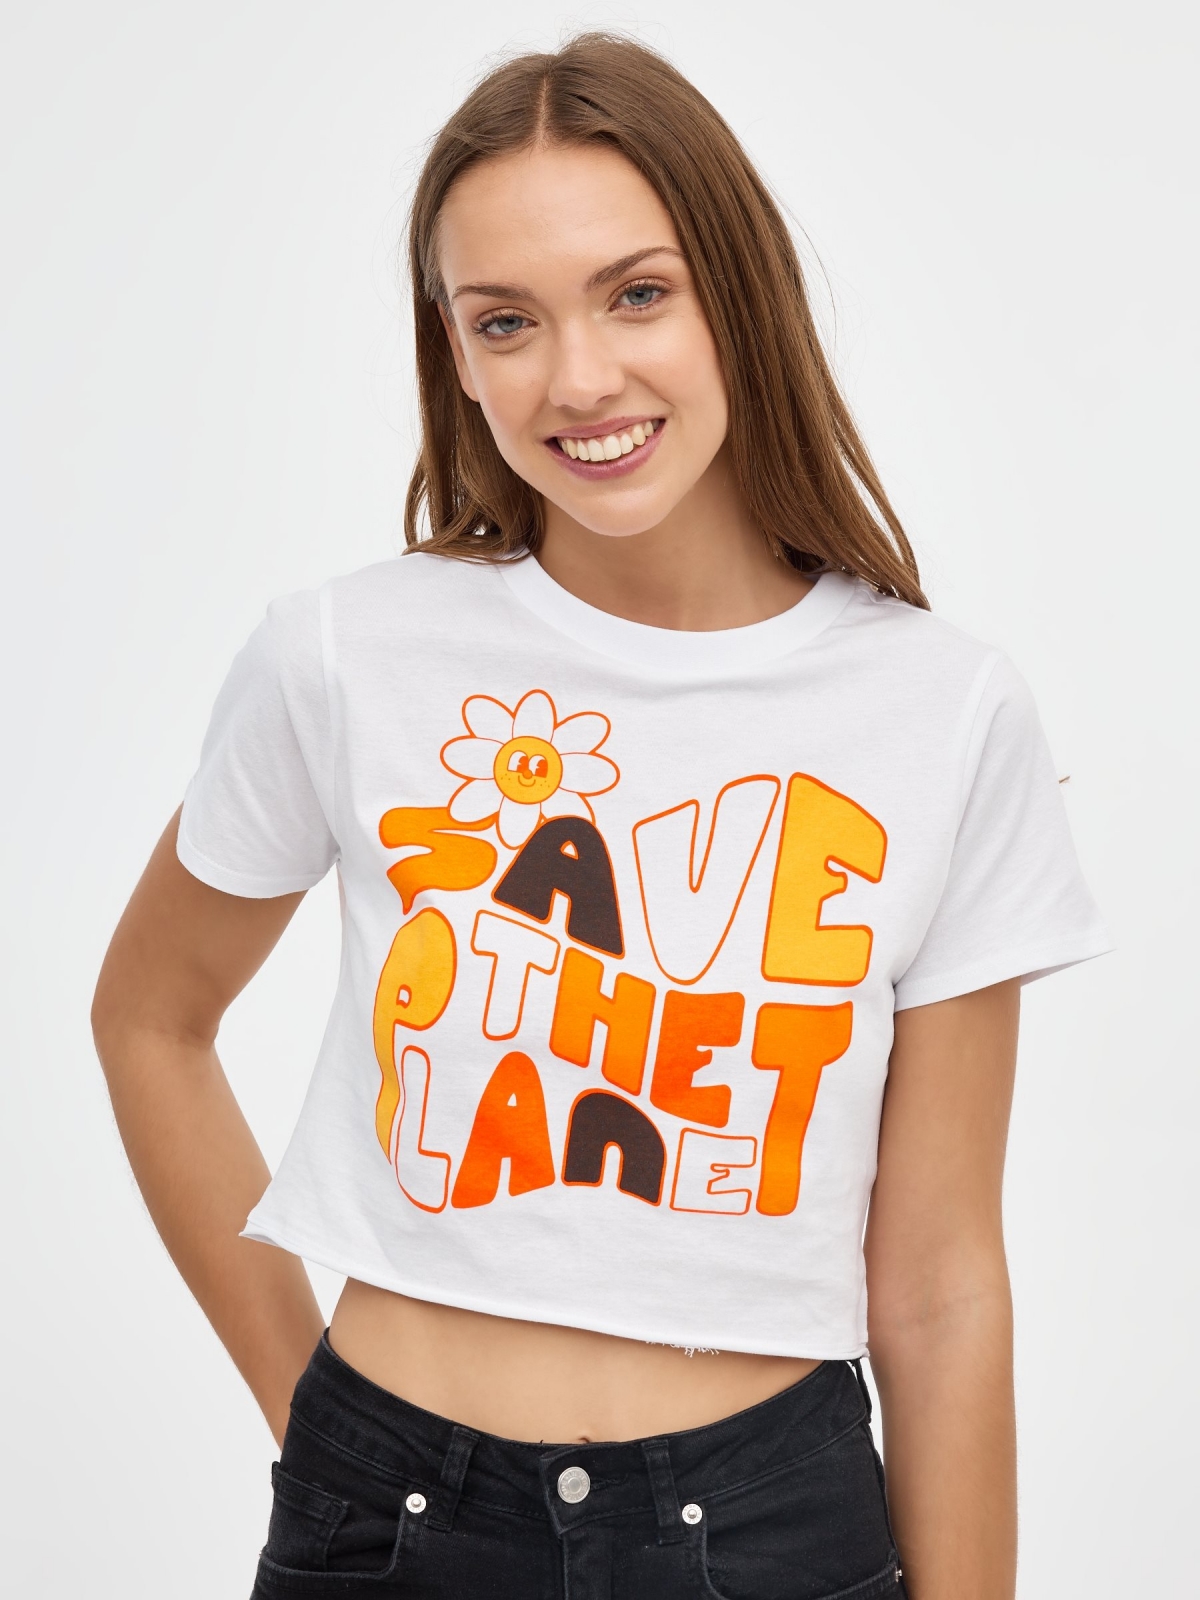 Save the Planet T-shirt